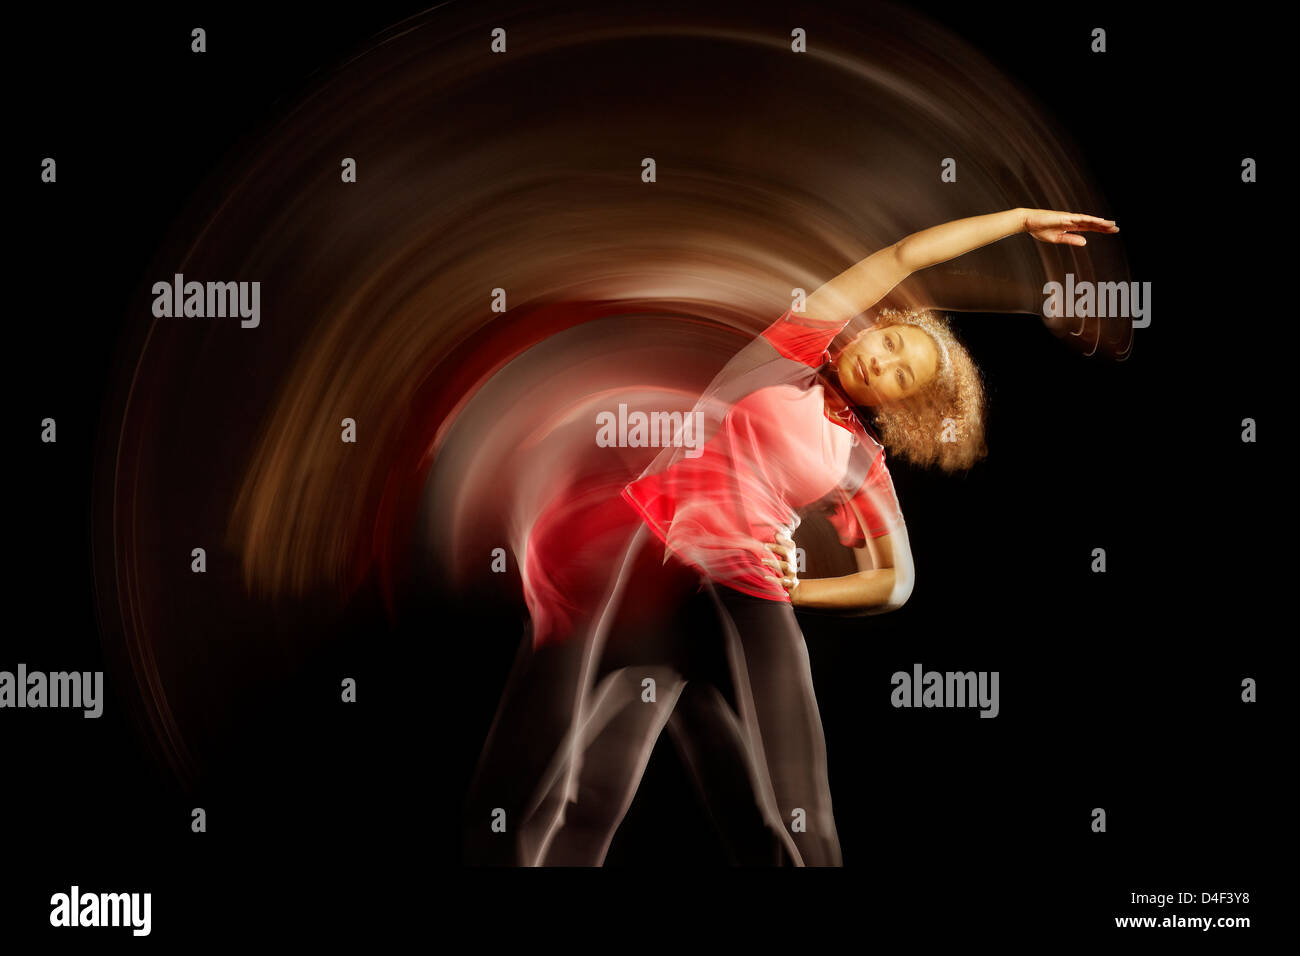 Time lapse view of dancer stretching Stock Photo